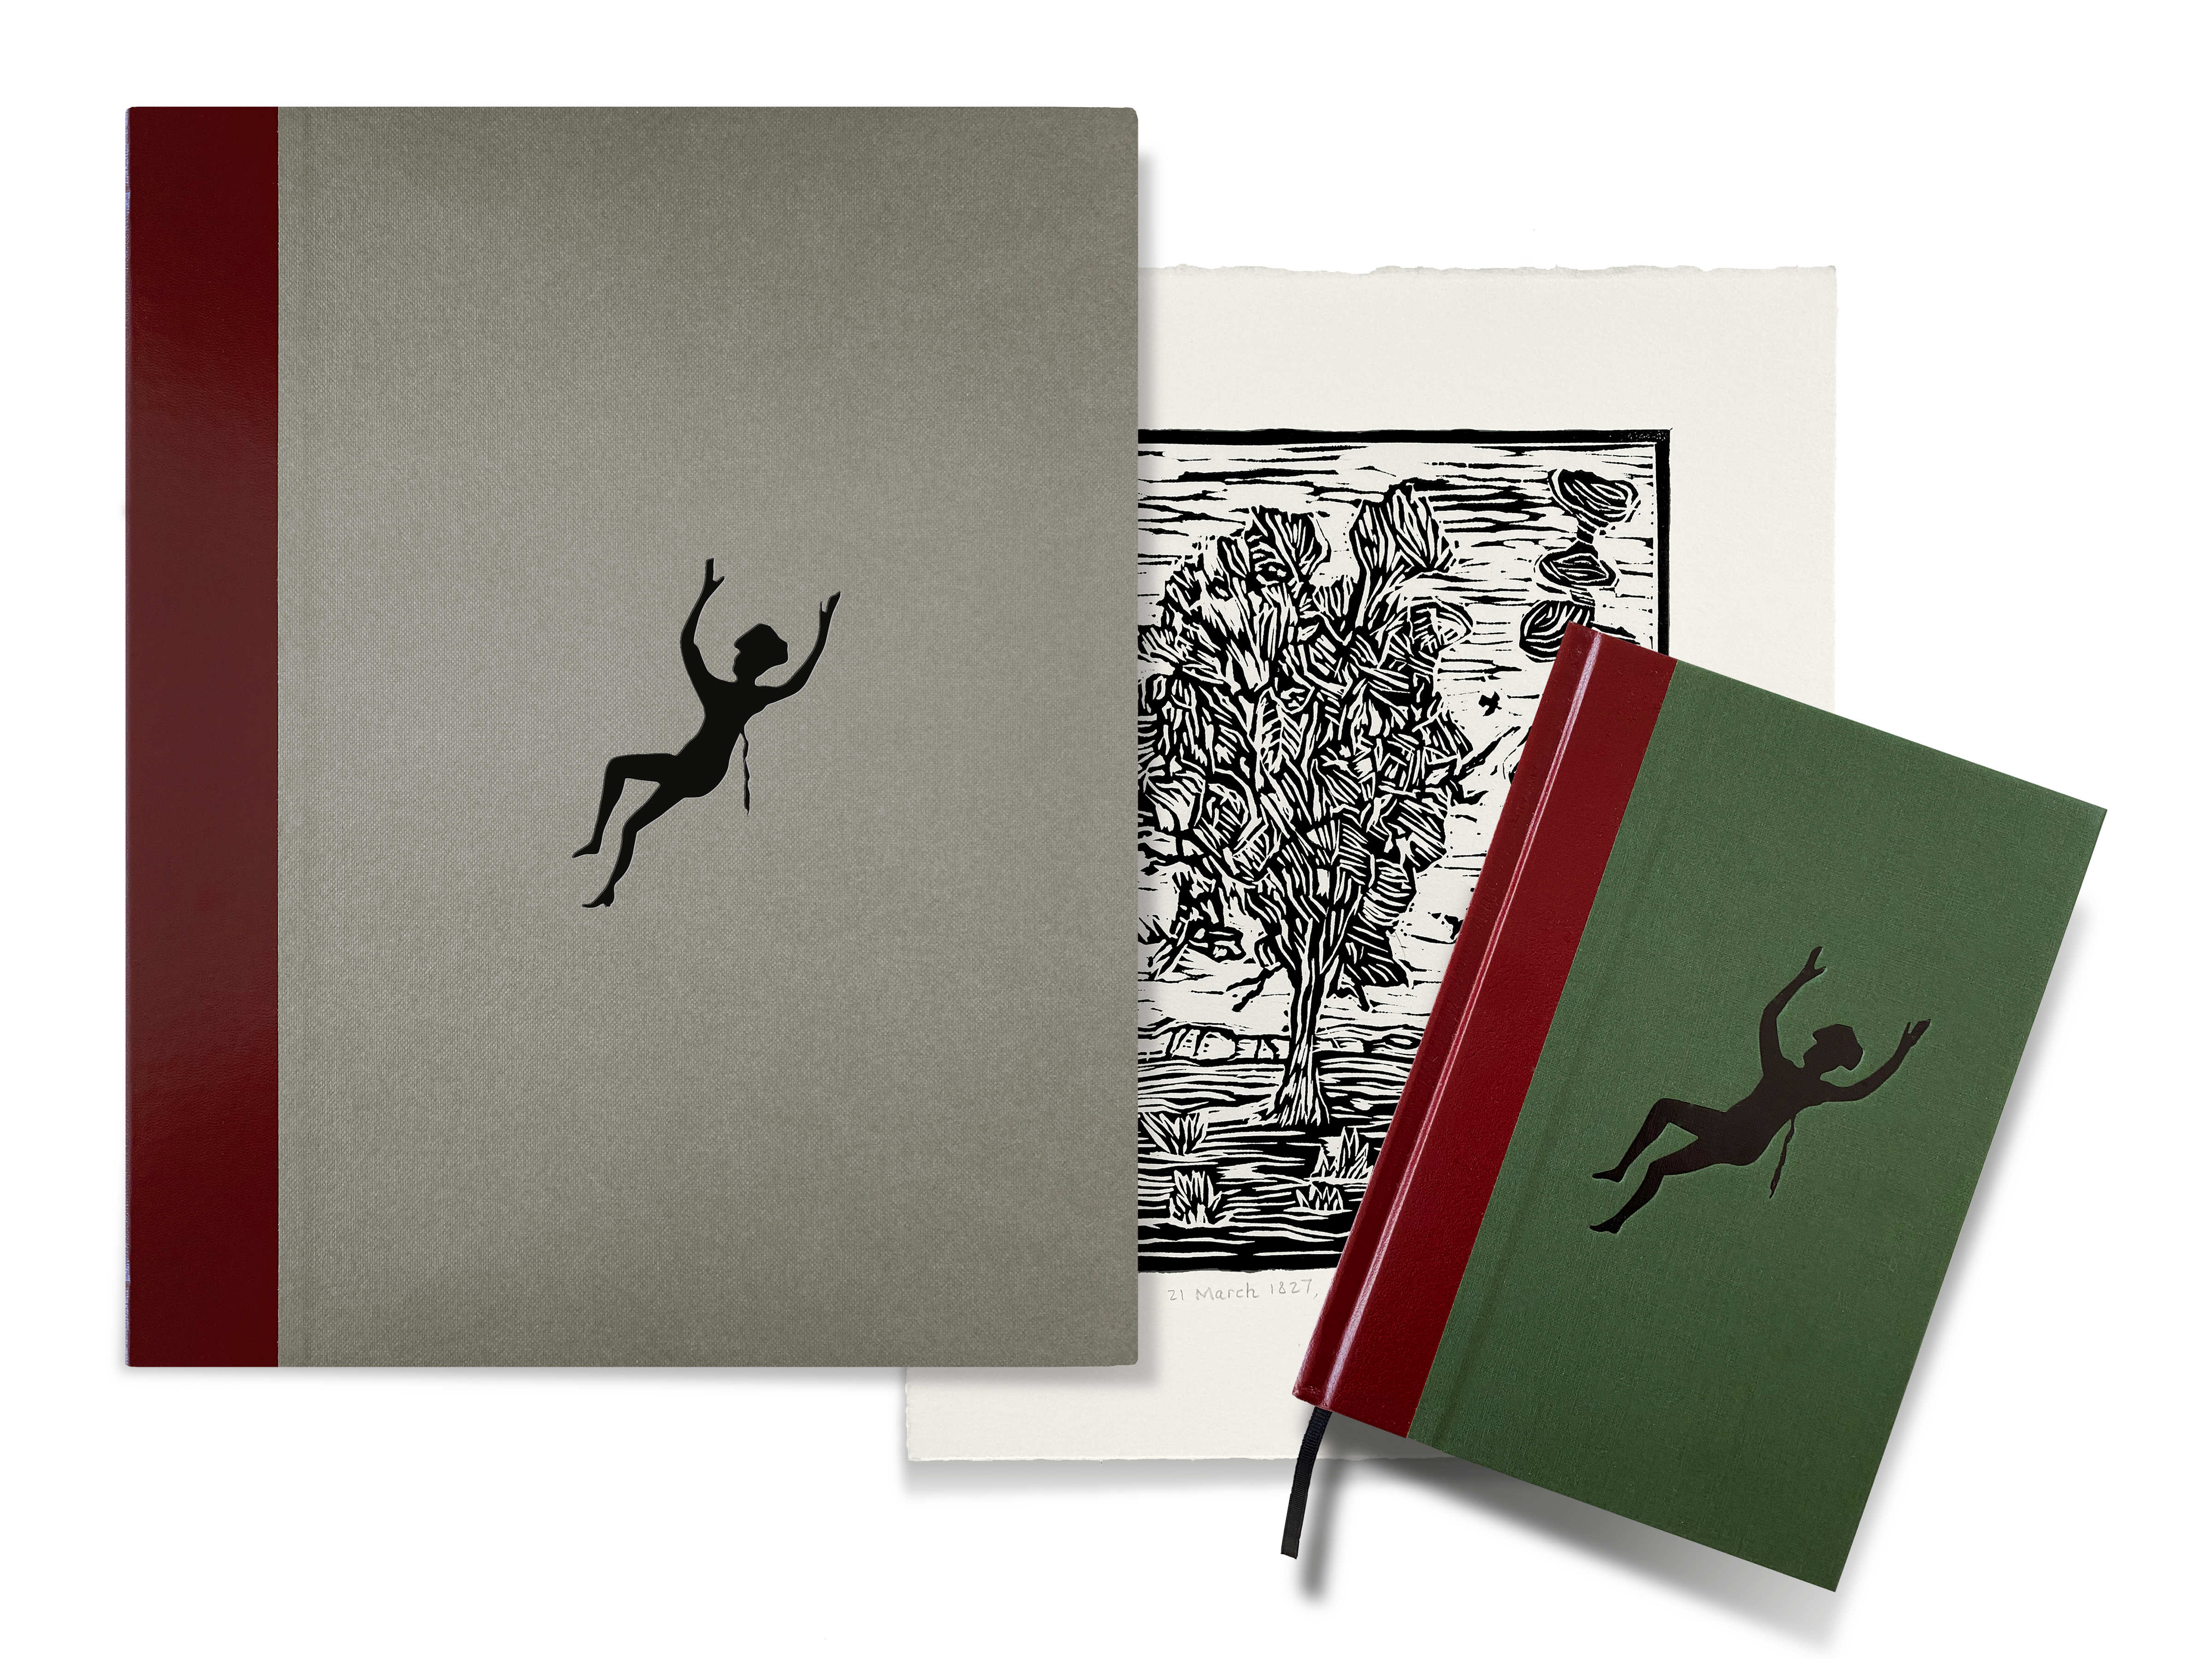 Image of the Artist Folio with grey cover, dark red spine and silhouette of a falling figure (at left) overlayed with a copy of the Standard Edition book (at right) with its green cover, dark red spine and a silhouette of a falling figure.